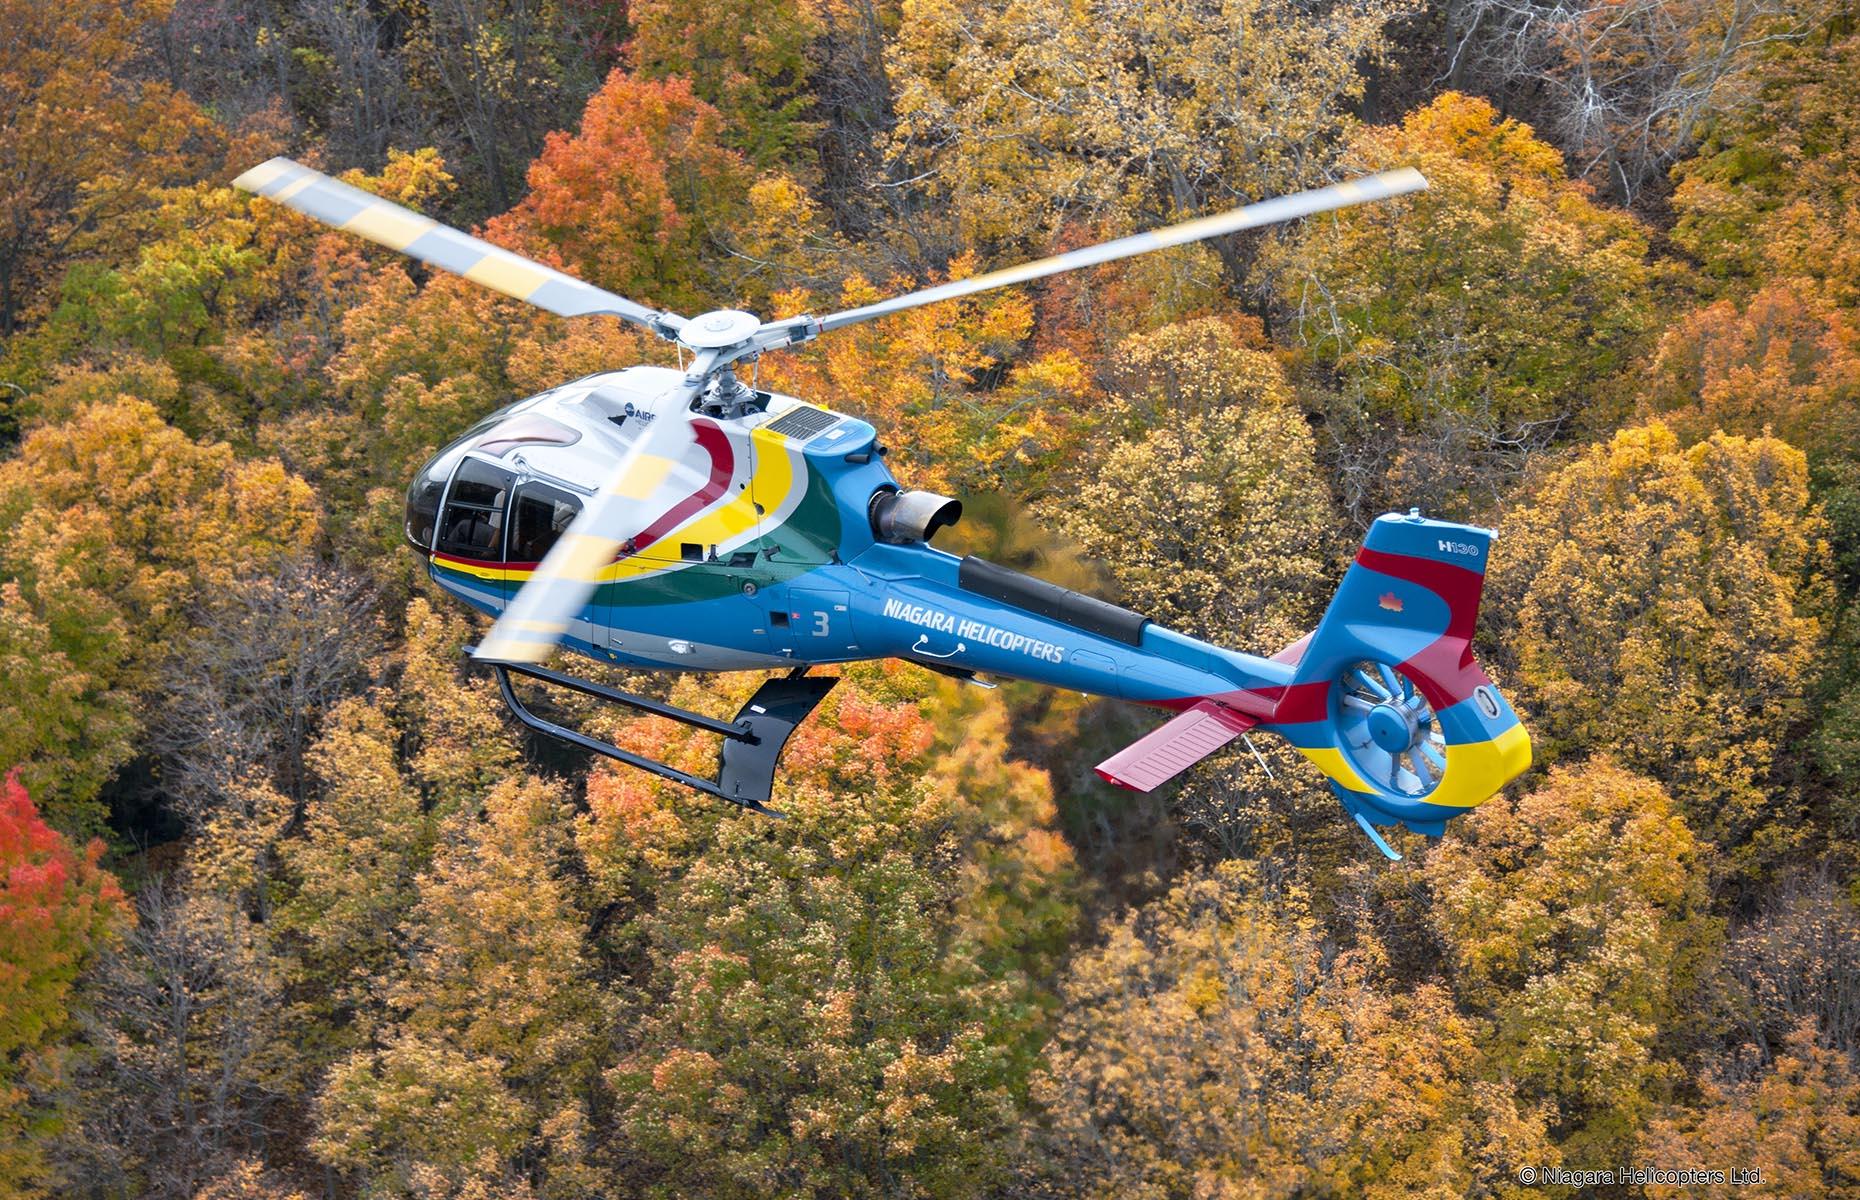 <p>Tick off two bucket-list experiences in one with a helicopter flight over the falls. This ride of a lifetime follows the Niagara River at 2,500 feet soaring high above the Niagara Whirlpool (look out for the historic Whirlpool Aero Car attraction crossing the Niagara Gorge), white water rapids, and the Rainbow Bridge.</p>  <p>You'll also witness the sheer magnitude of the Fallsview area featuring the American, Bridal Veil and majestic Horseshoe Falls. The helicopter changes course to follow the curve of Horseshoe Falls and it’s at this point where you should watch for rainbows appearing and disappearing from all directions.</p>  <p>You'll then fly above the Skylon Tower and the beauty of Queen Victoria Park before heading back to base.</p>